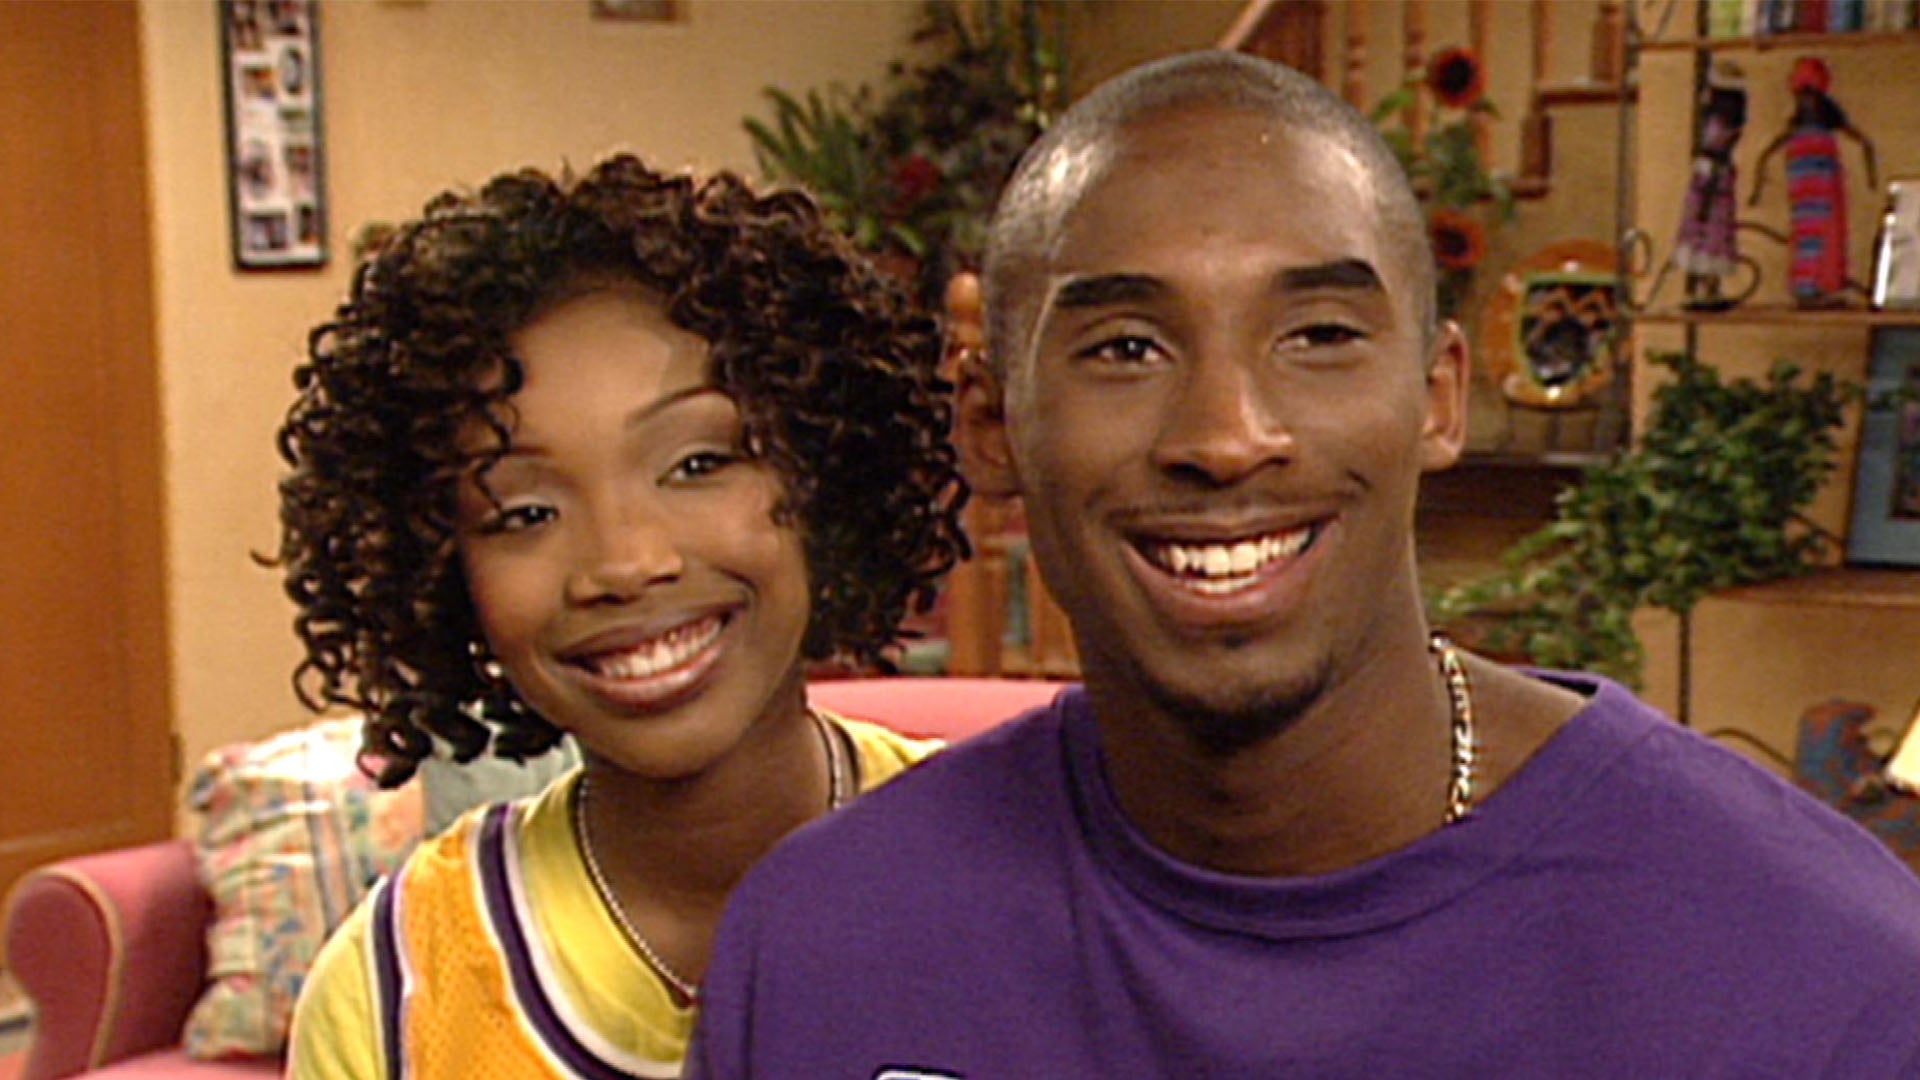 Brandy Speaks Out on the Death of Kobe Bryant, Her 1996 Prom Date